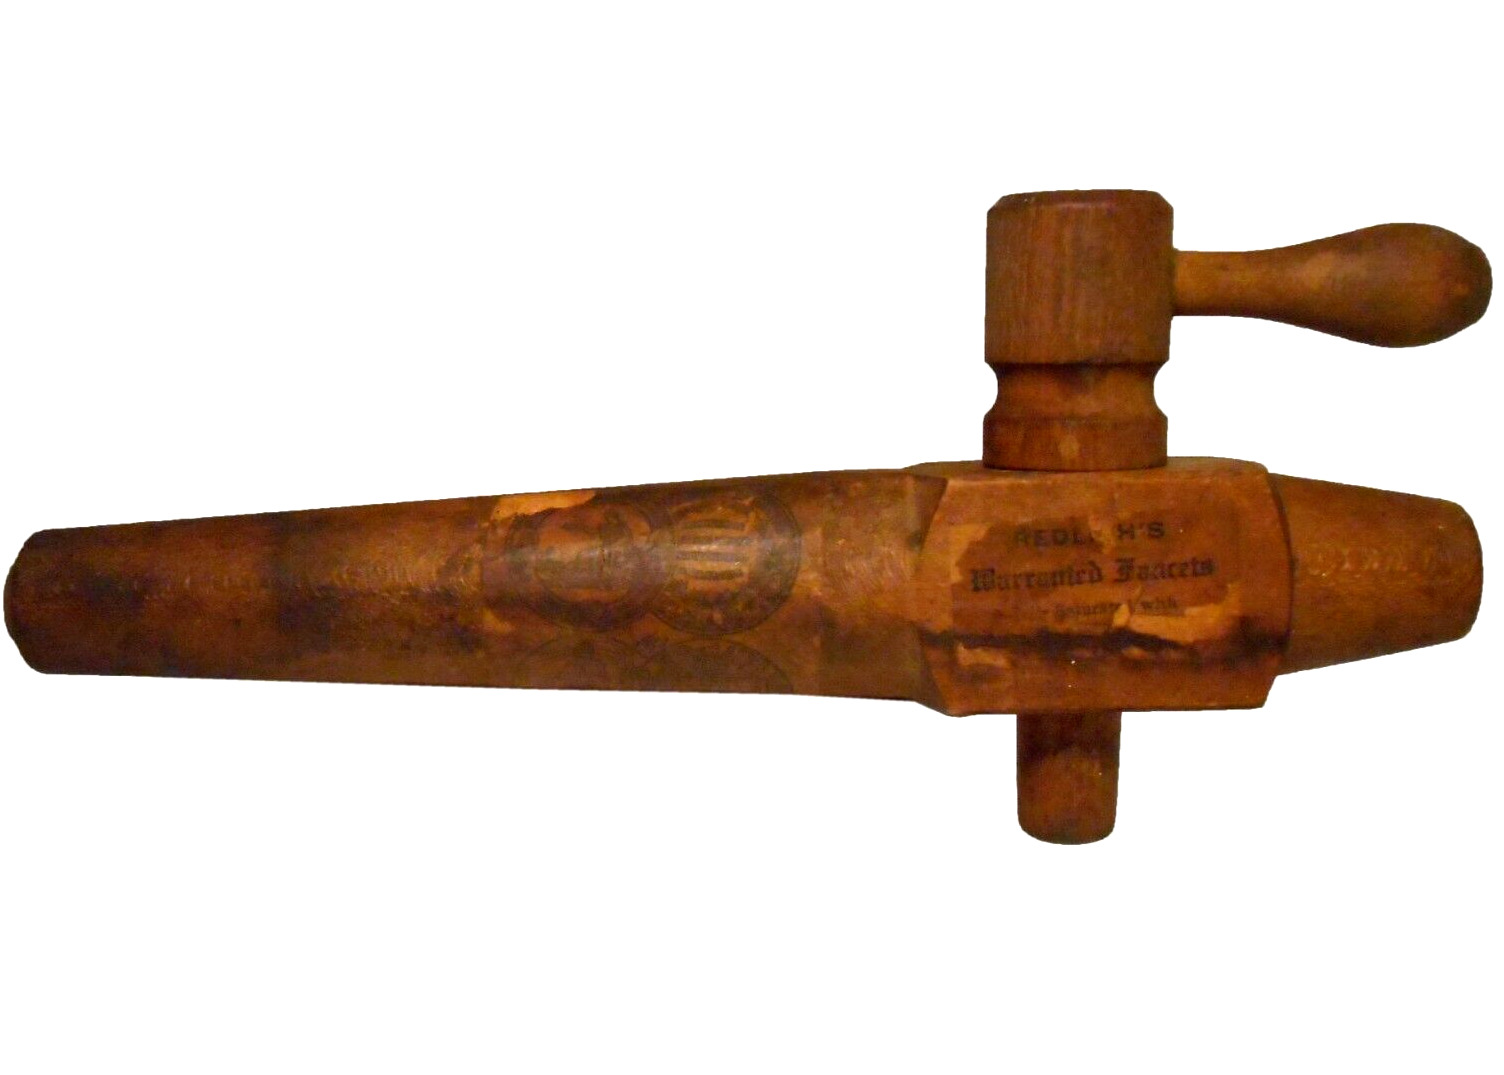 REDLICH\'S WARRANTED FAUCETS EARLY 20TH C ANTIQUE SGND BEER KEG WDN BUNG SPIGOT